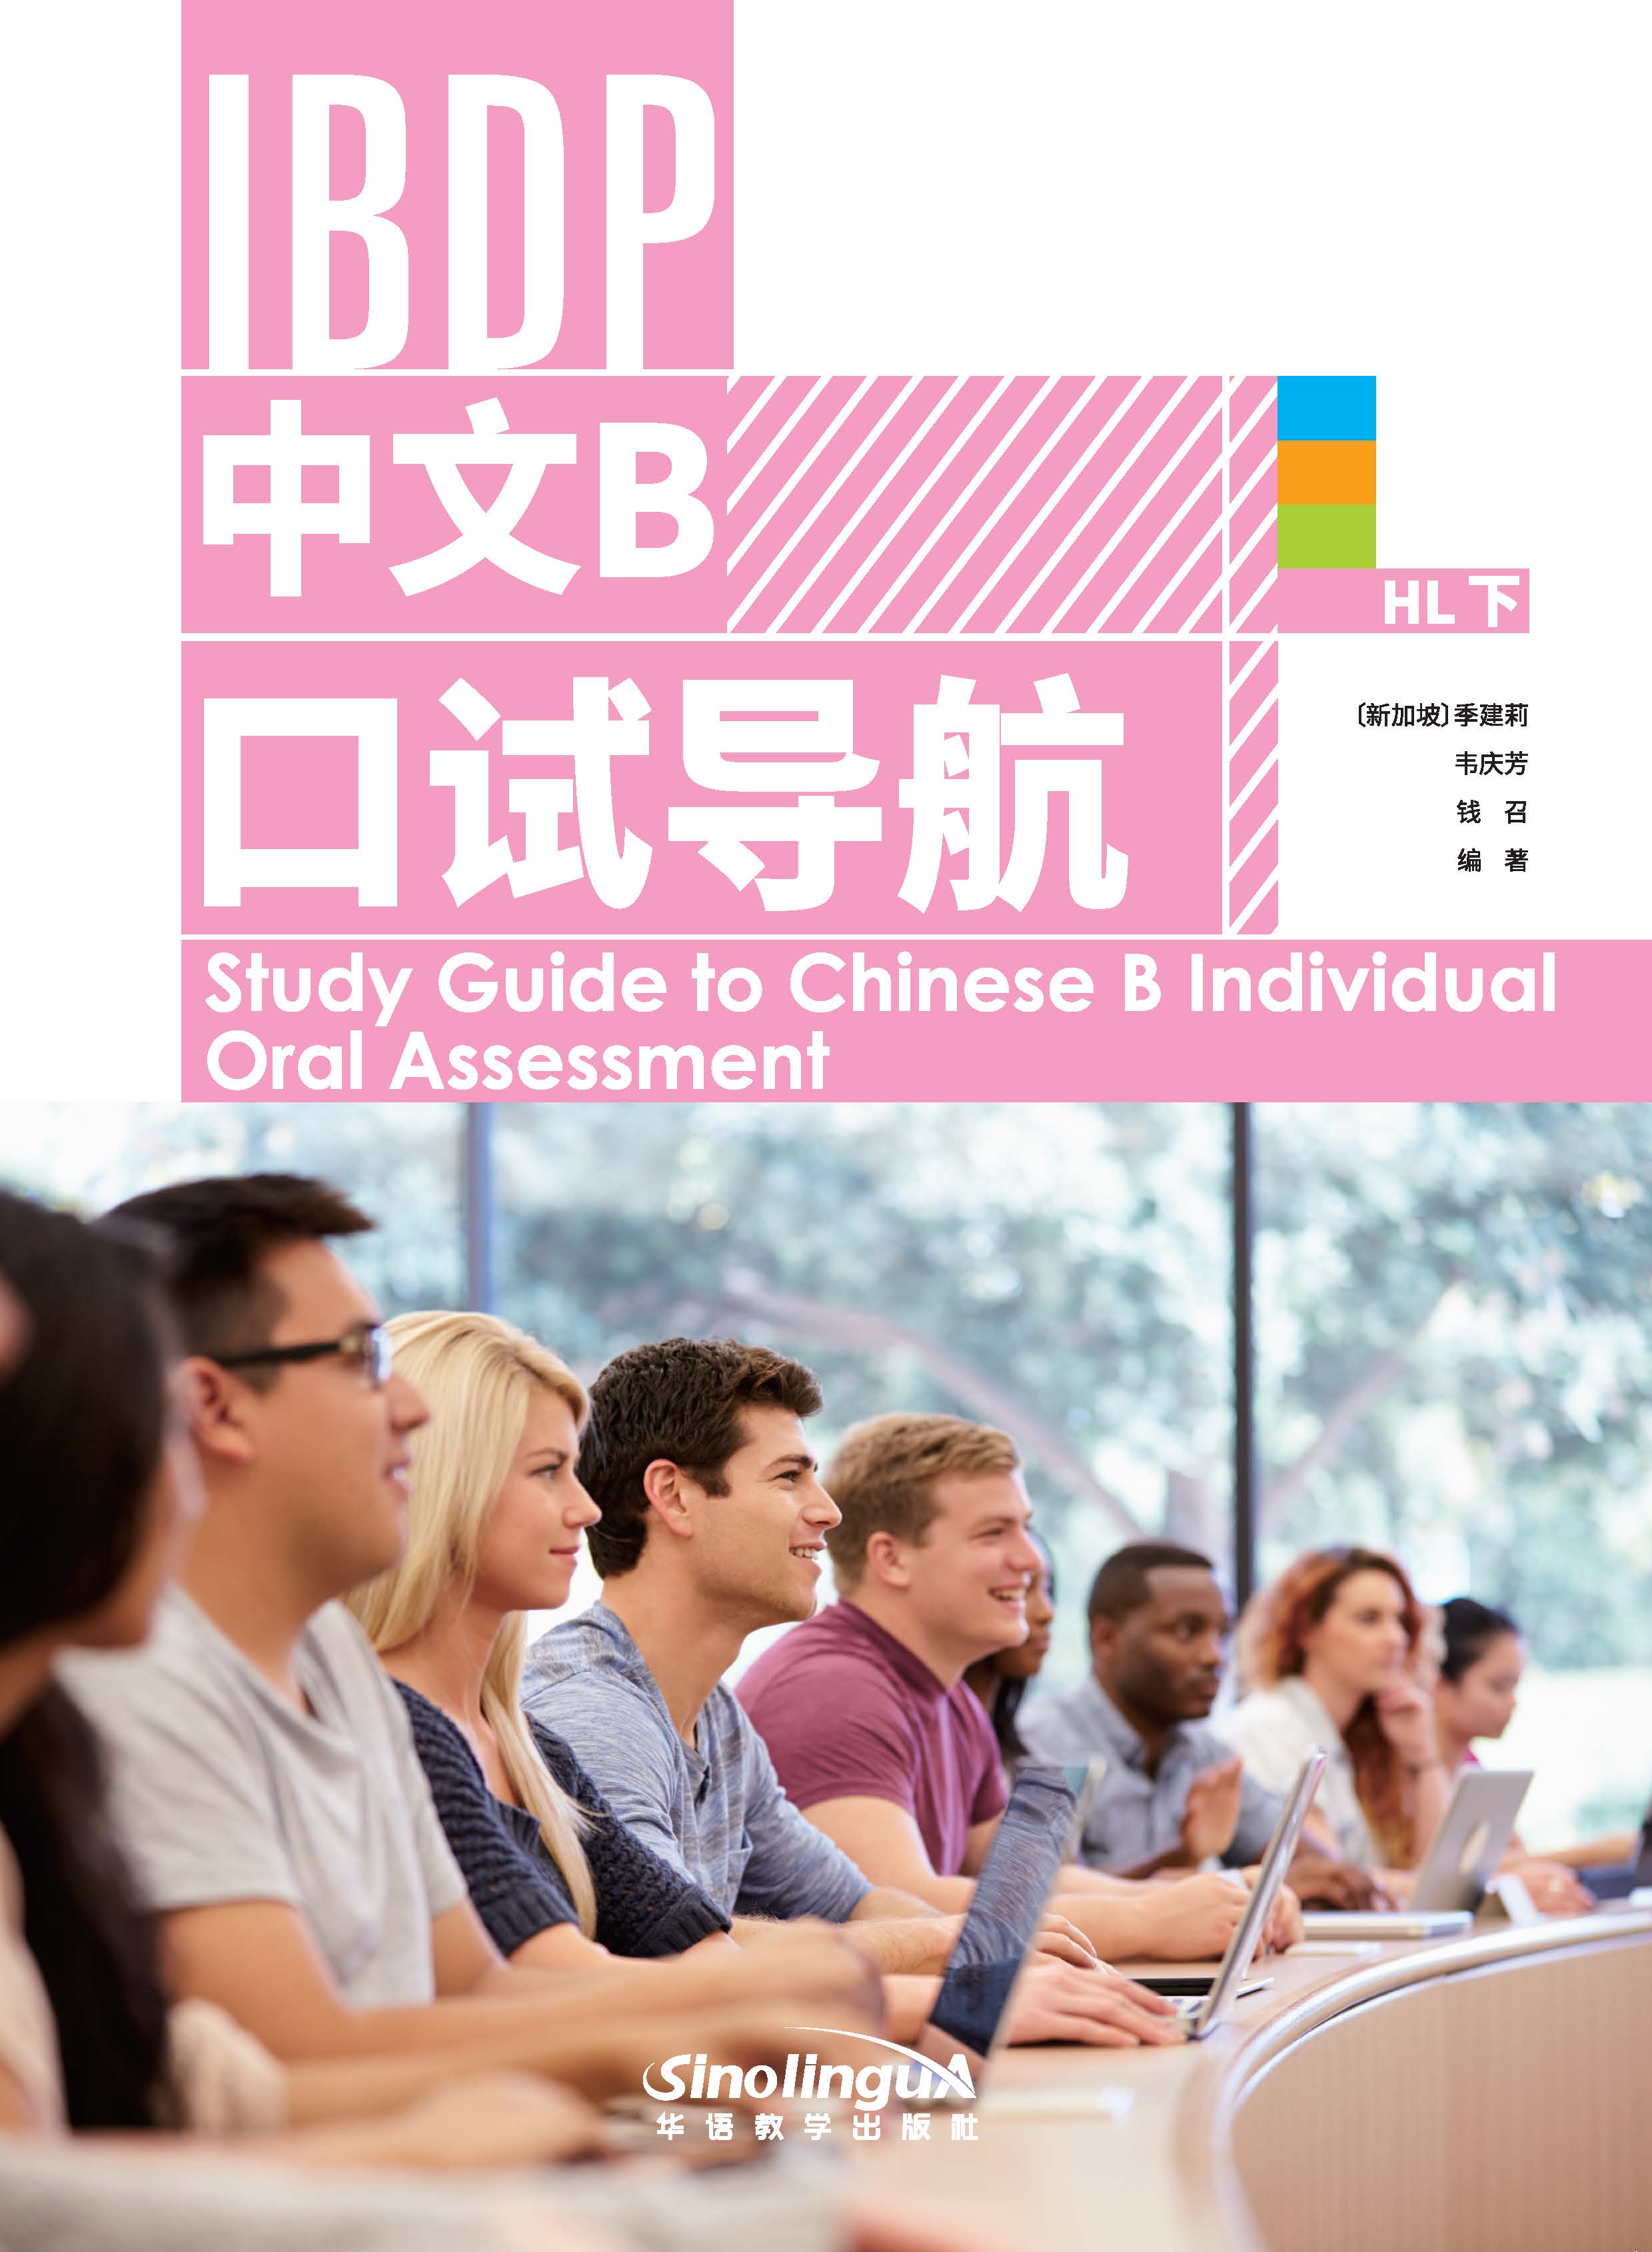 IBDP 中文B 口试导航 HL下  Study Guide to Chinese B Individual Oral Assessment HL 2